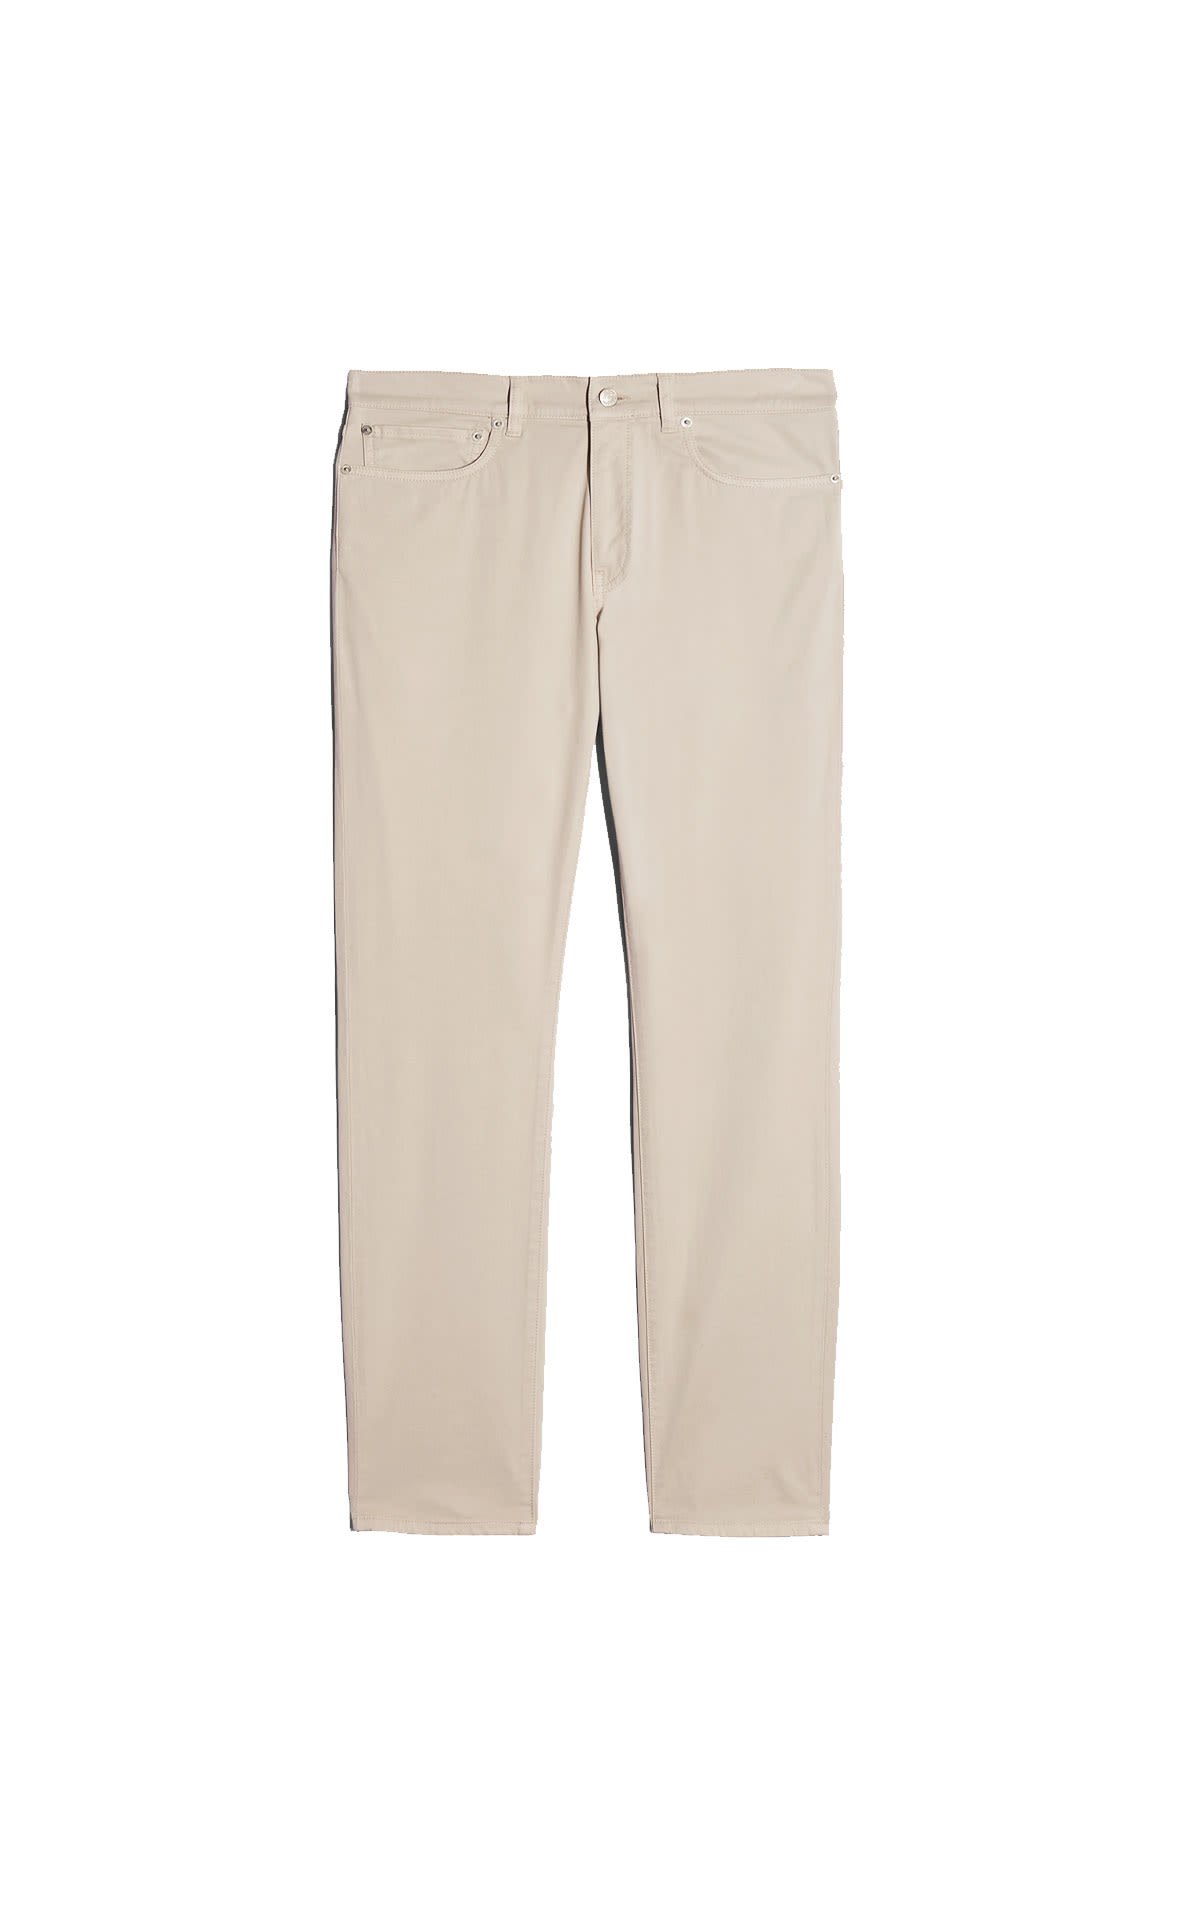 dunhill Cotton twill 5 pocket trousers pale grey from Bicester Village